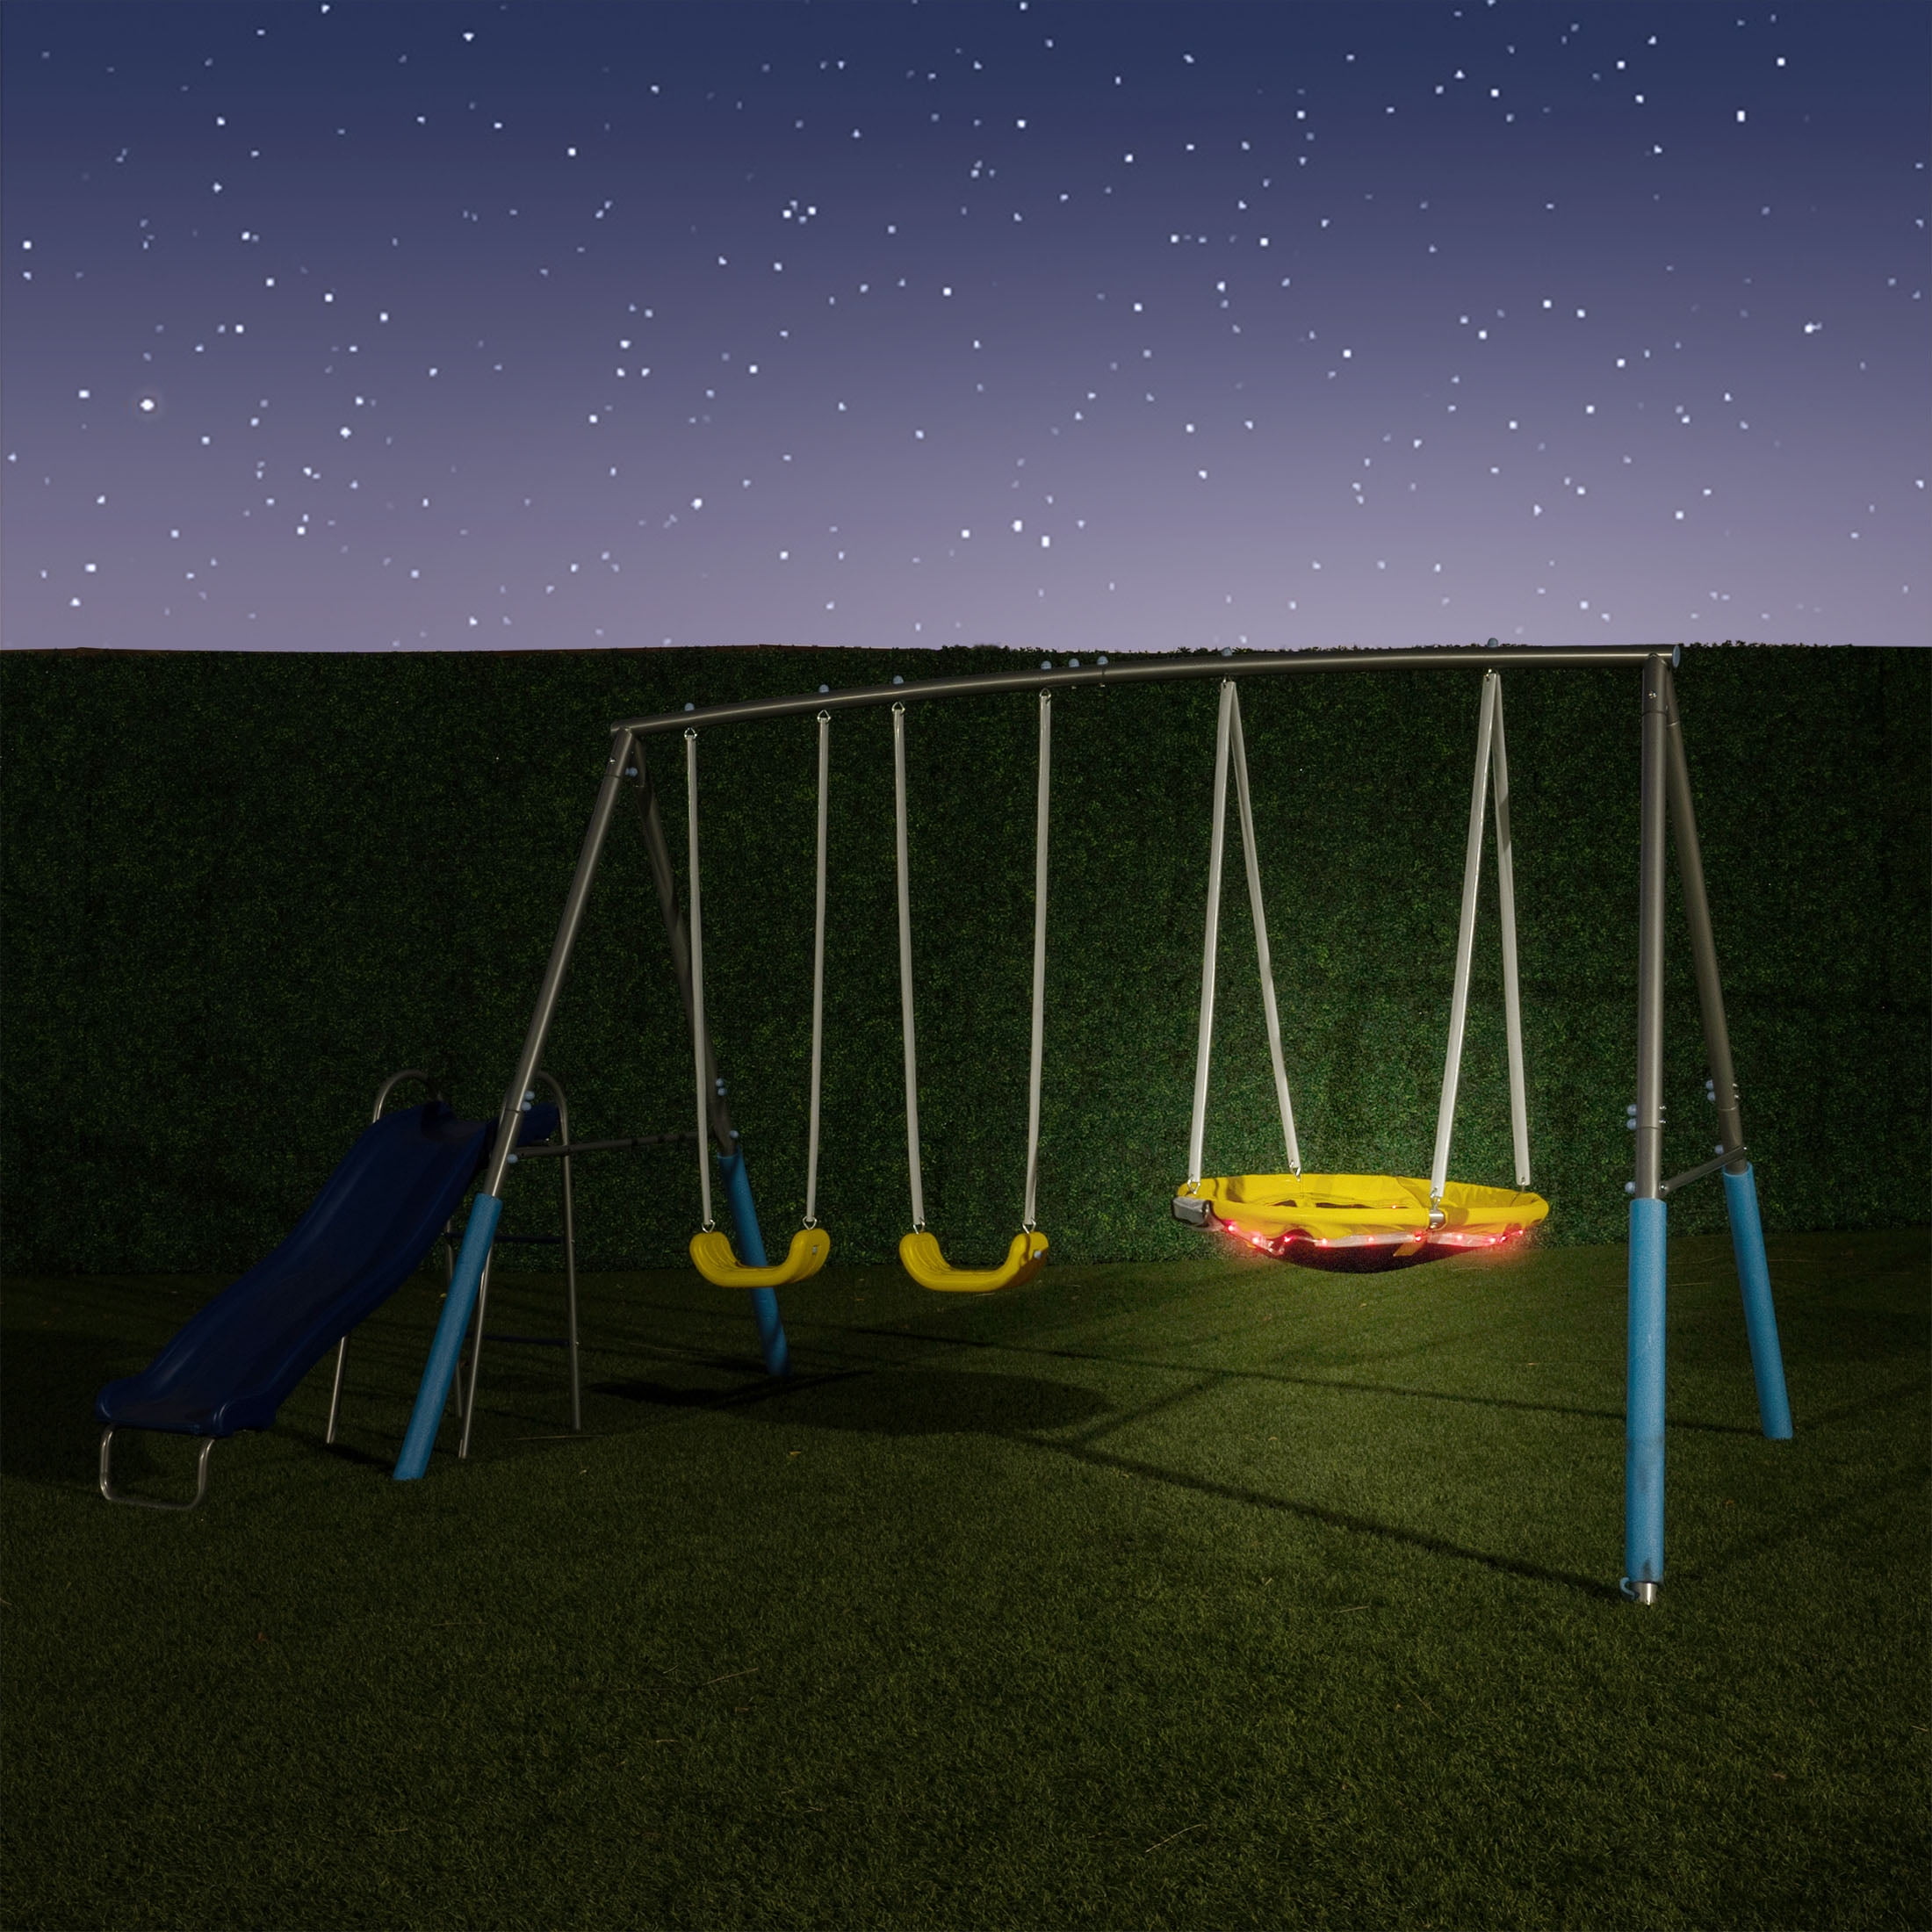 Sportspower Comet Metal Swing Set with LED Light up Saucer Swing - 2